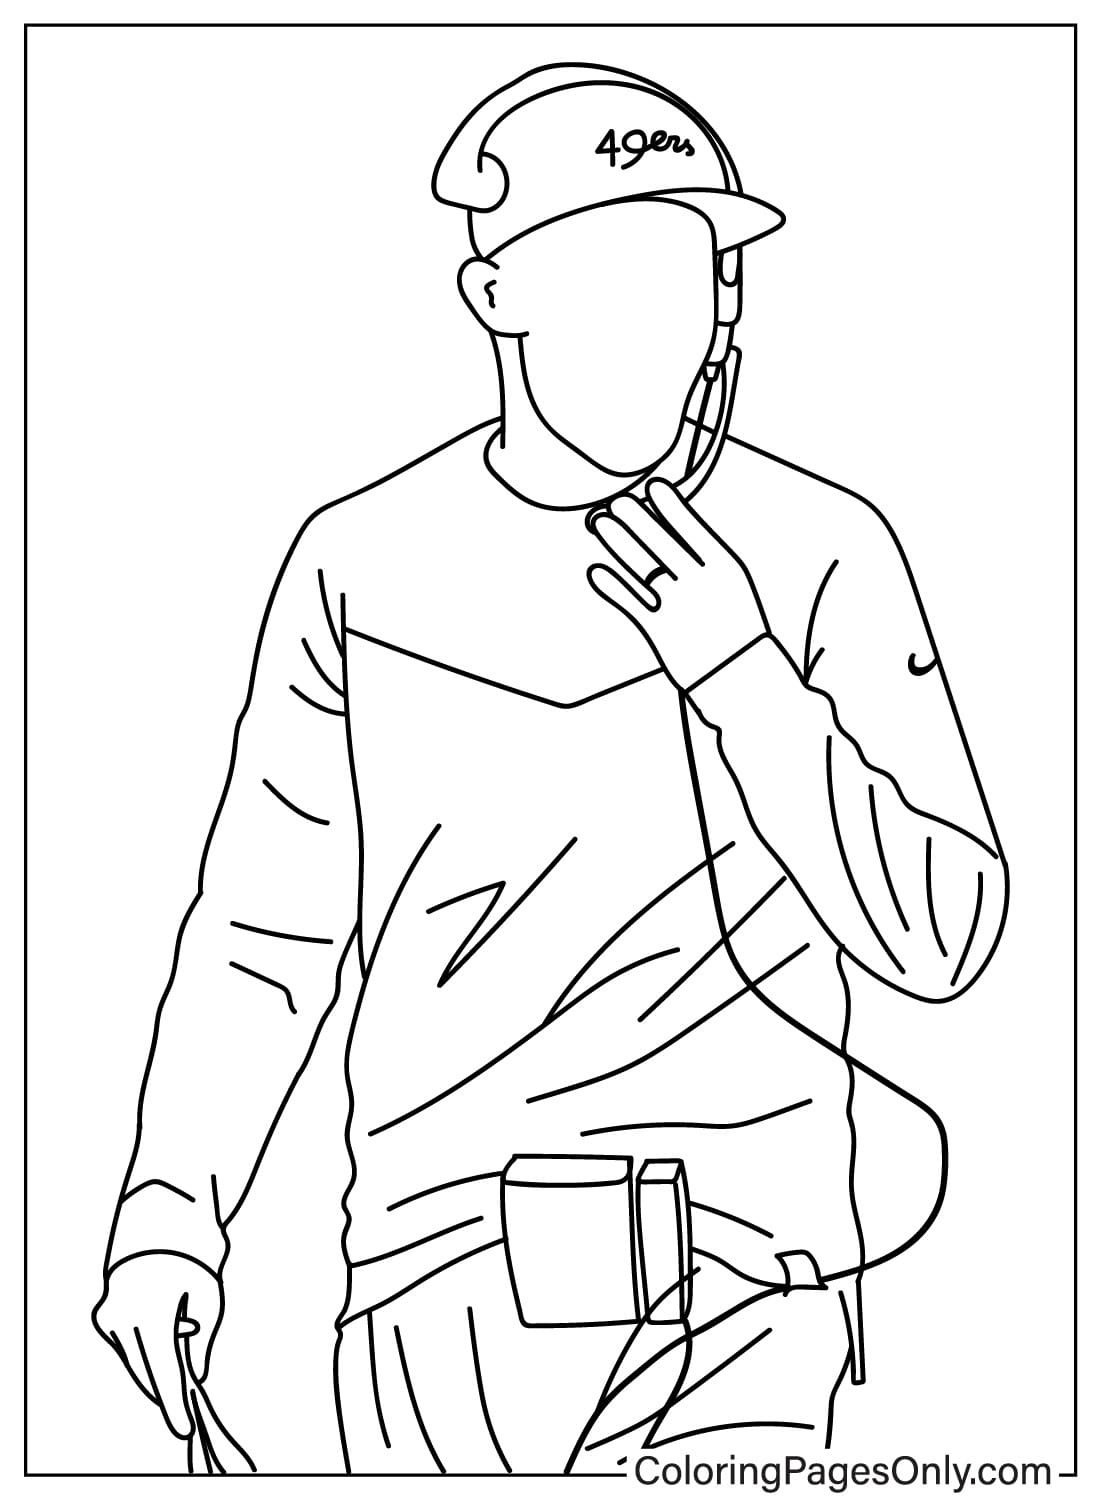 Kyle Shanahan Coloring Page from San Francisco 49ers